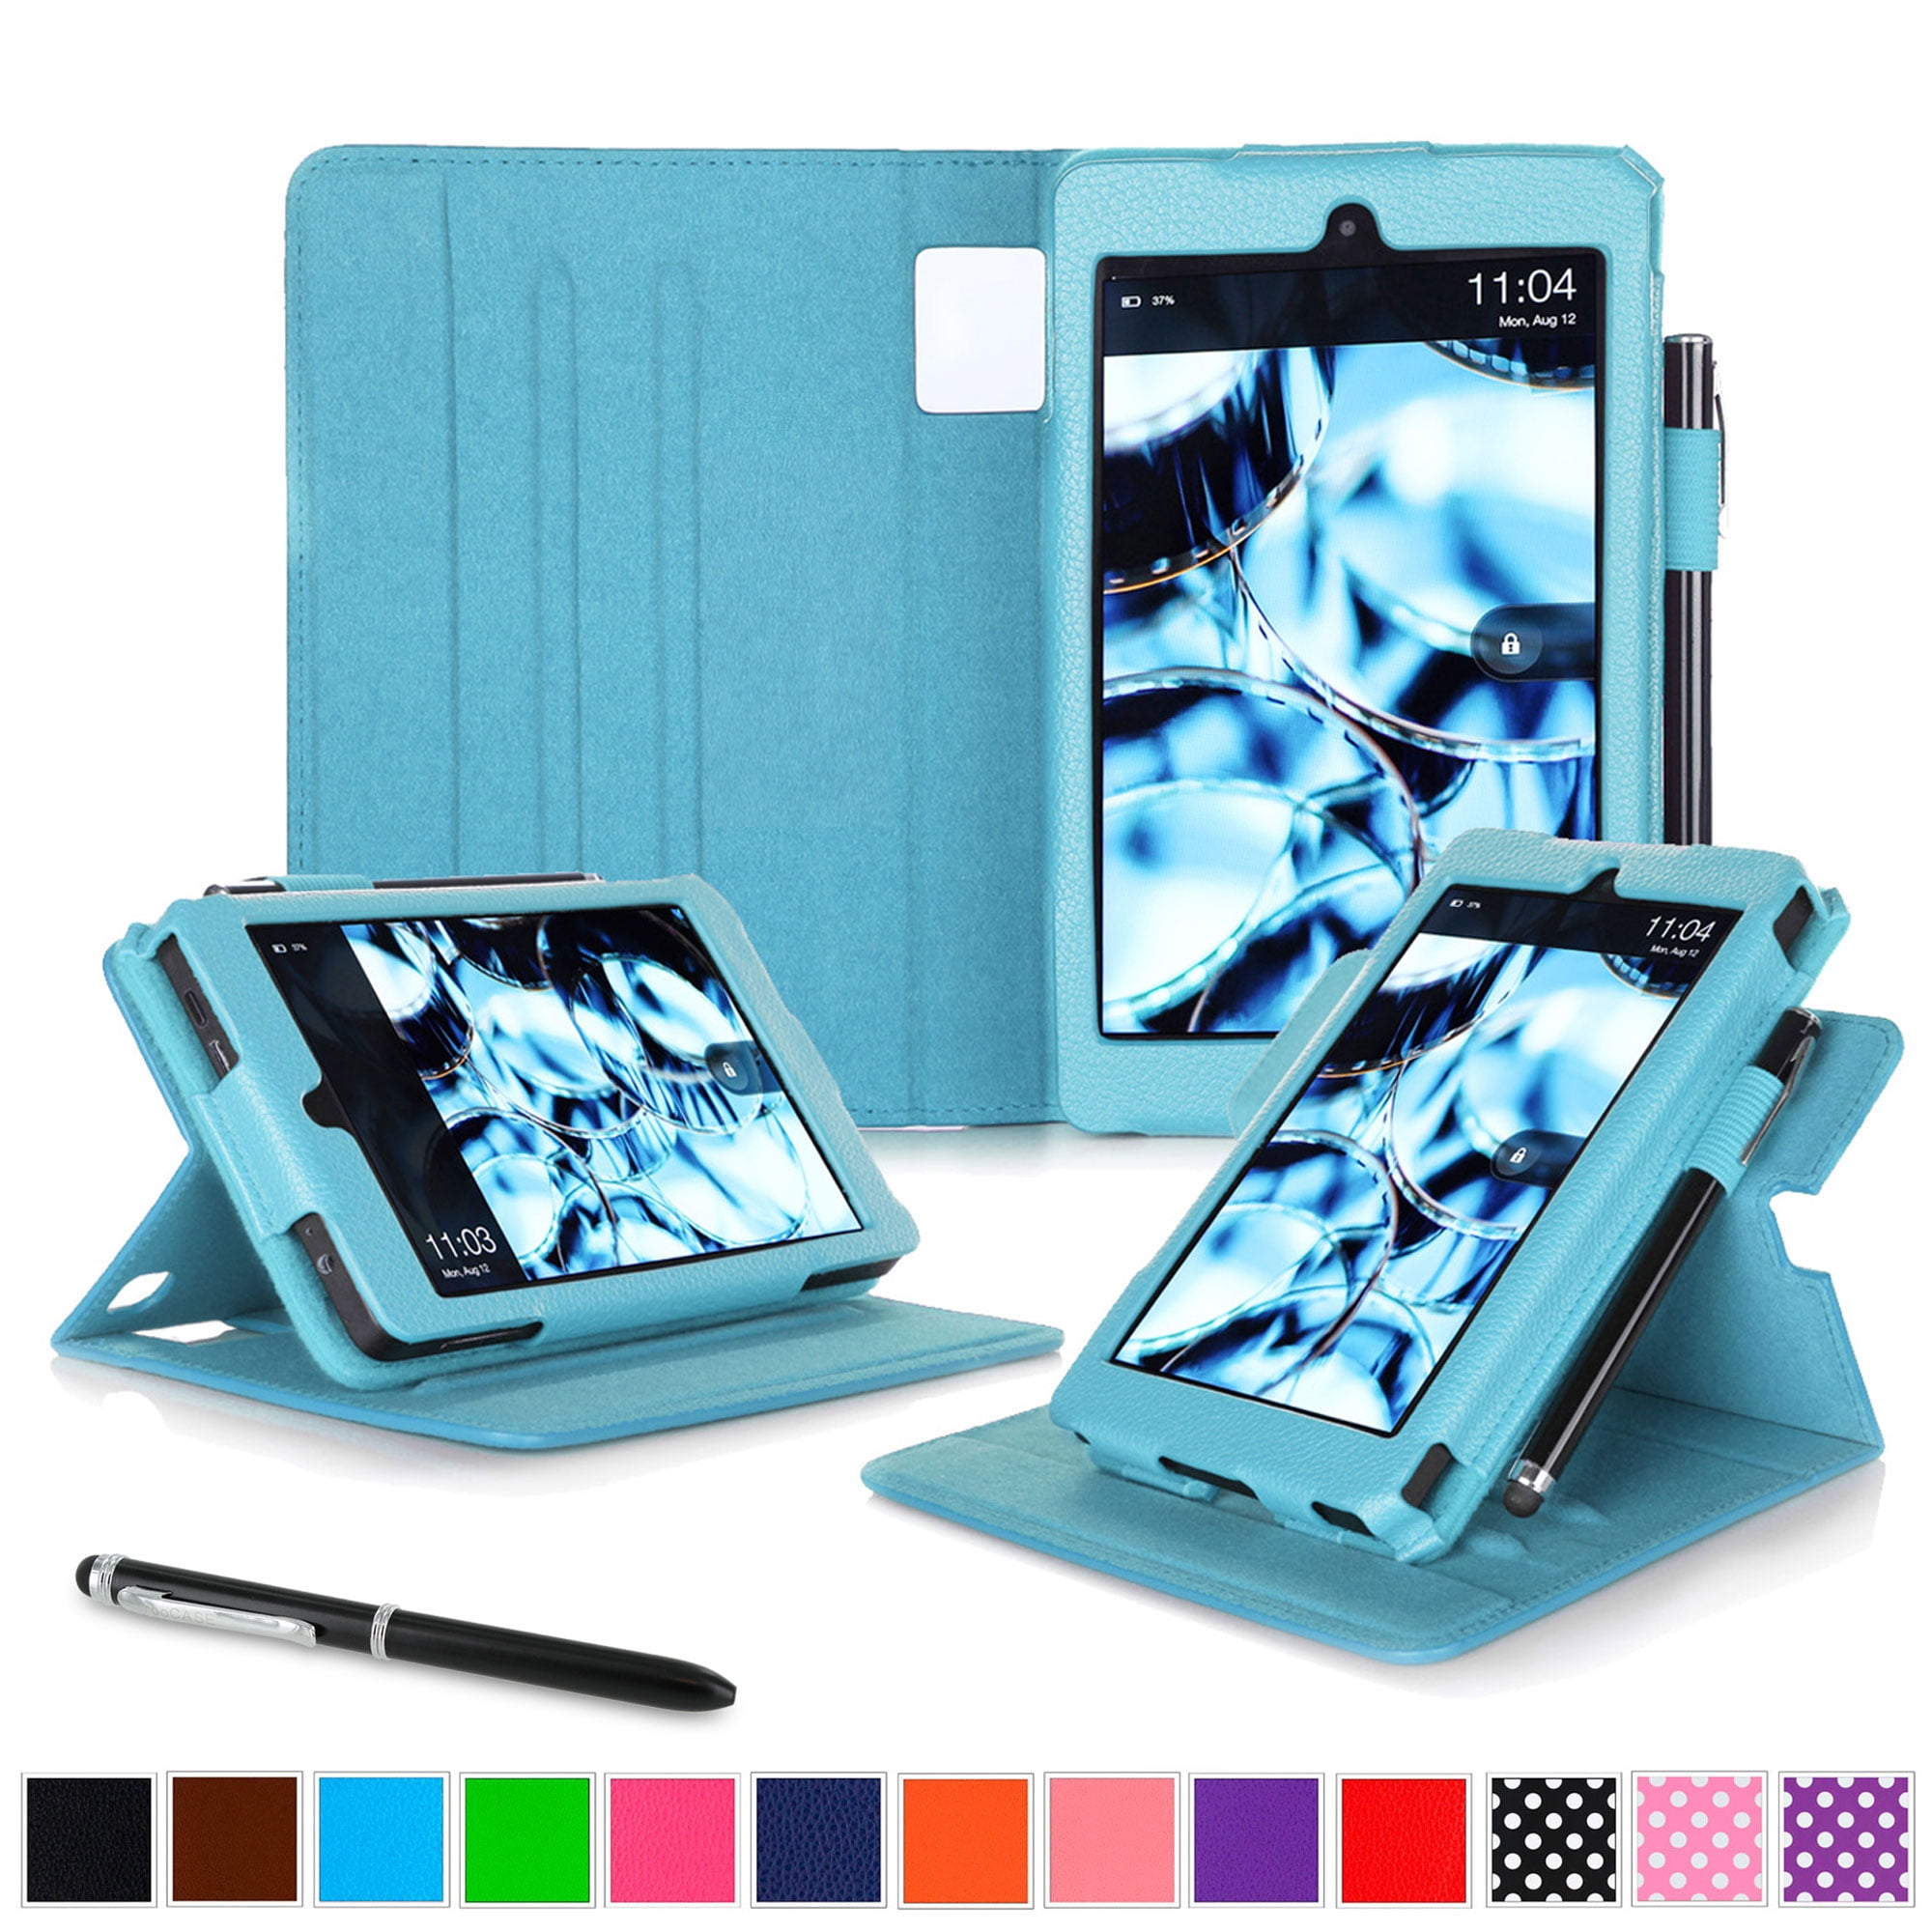 Fire HD 6 Tablet (2014) Case, roocase new Fire HD 6 Dual View Folio Case with Sleep / Wake Smart Cover with Multi-Viewing Stand for All-New Fire HD 6 Tablet (2014)